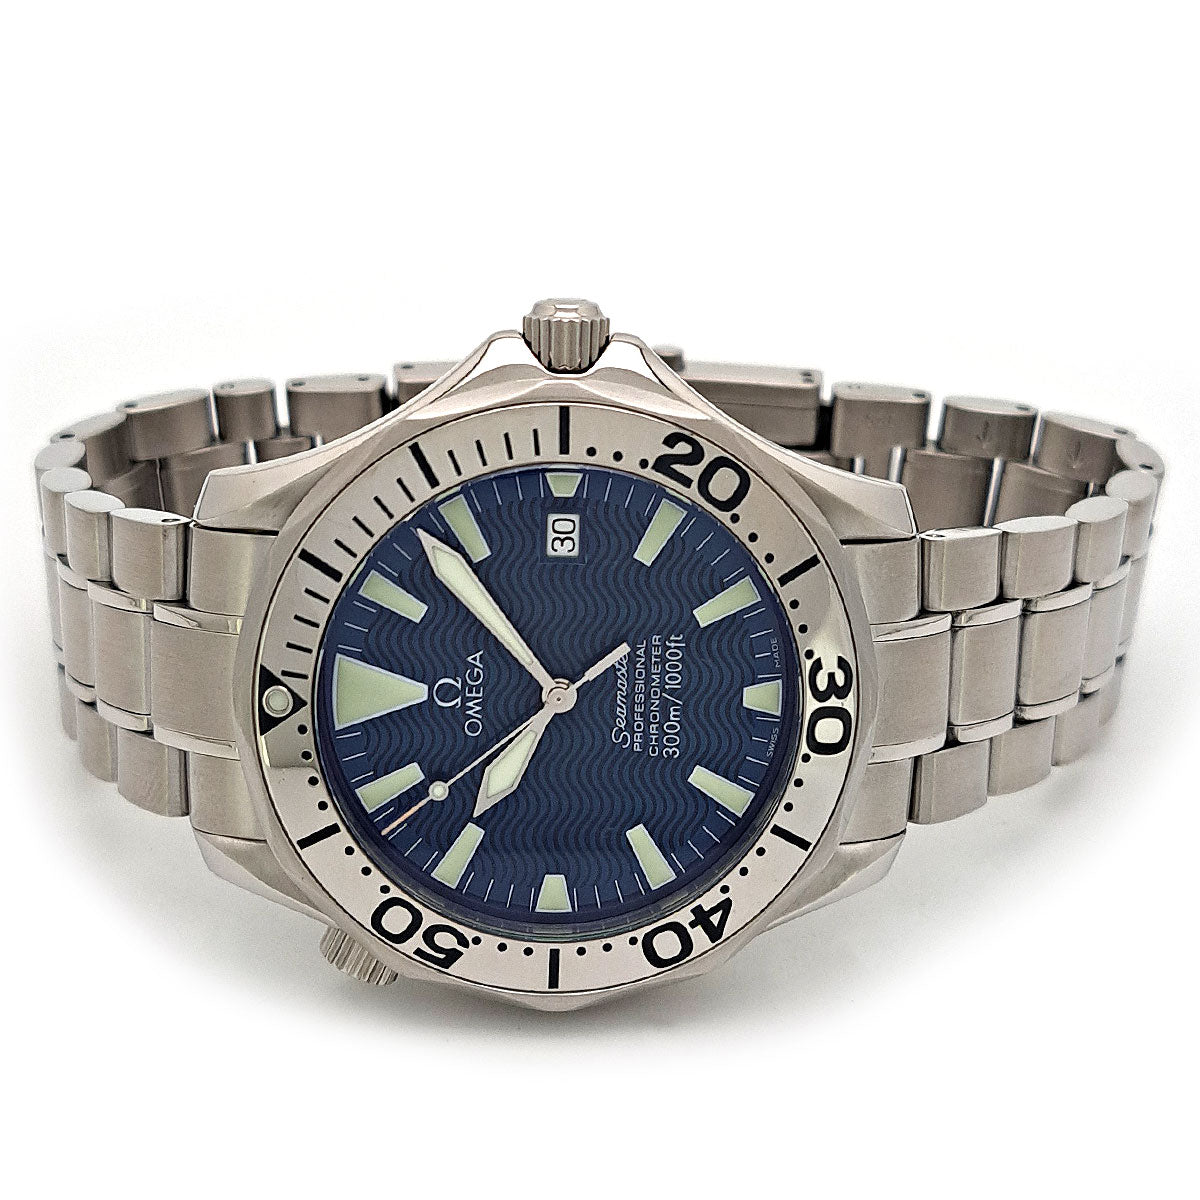 OMEGA SeaMaster Professional 300M Stainless Steel Men's Timepiece, Overhauled Model 2255.80 2255.8